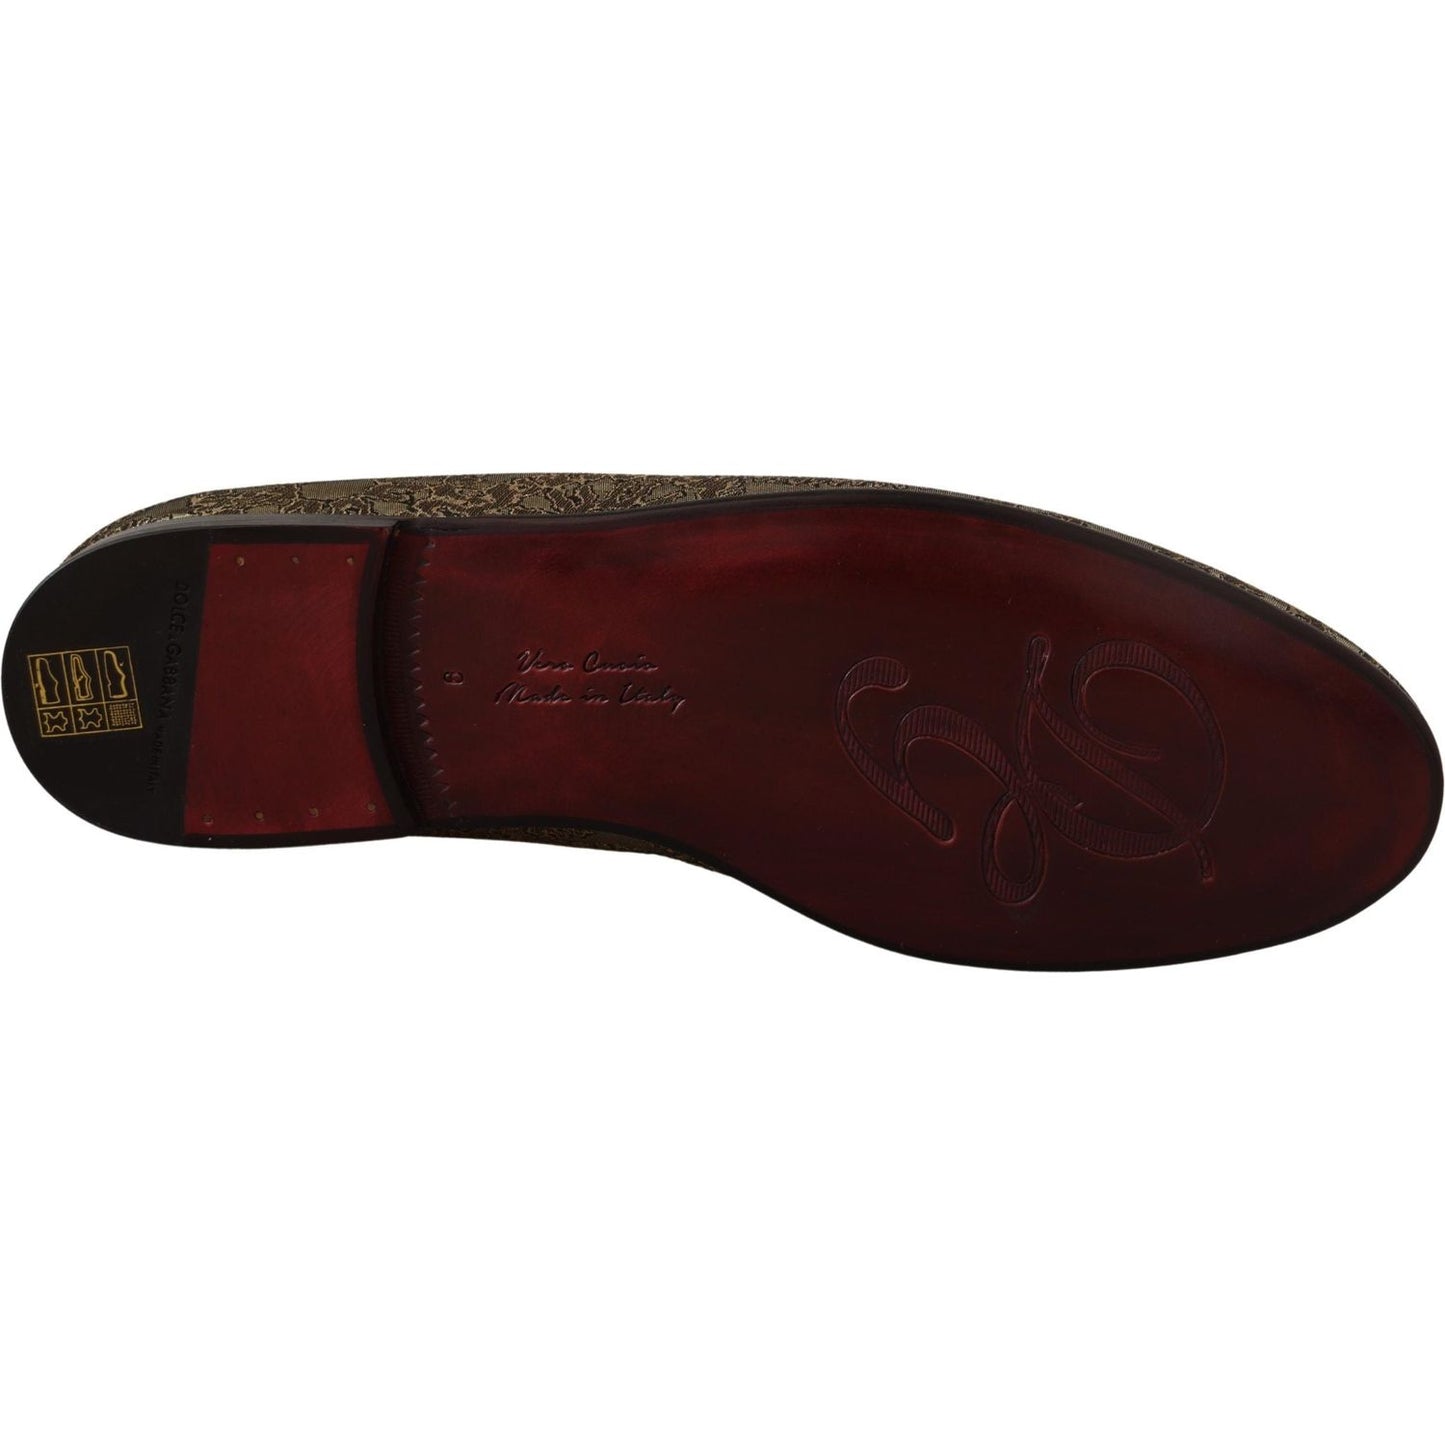 Dolce & Gabbana Gold Tone Loafers Slides Dress Shoes gold-jacquard-flats-mens-loafers-shoes-1